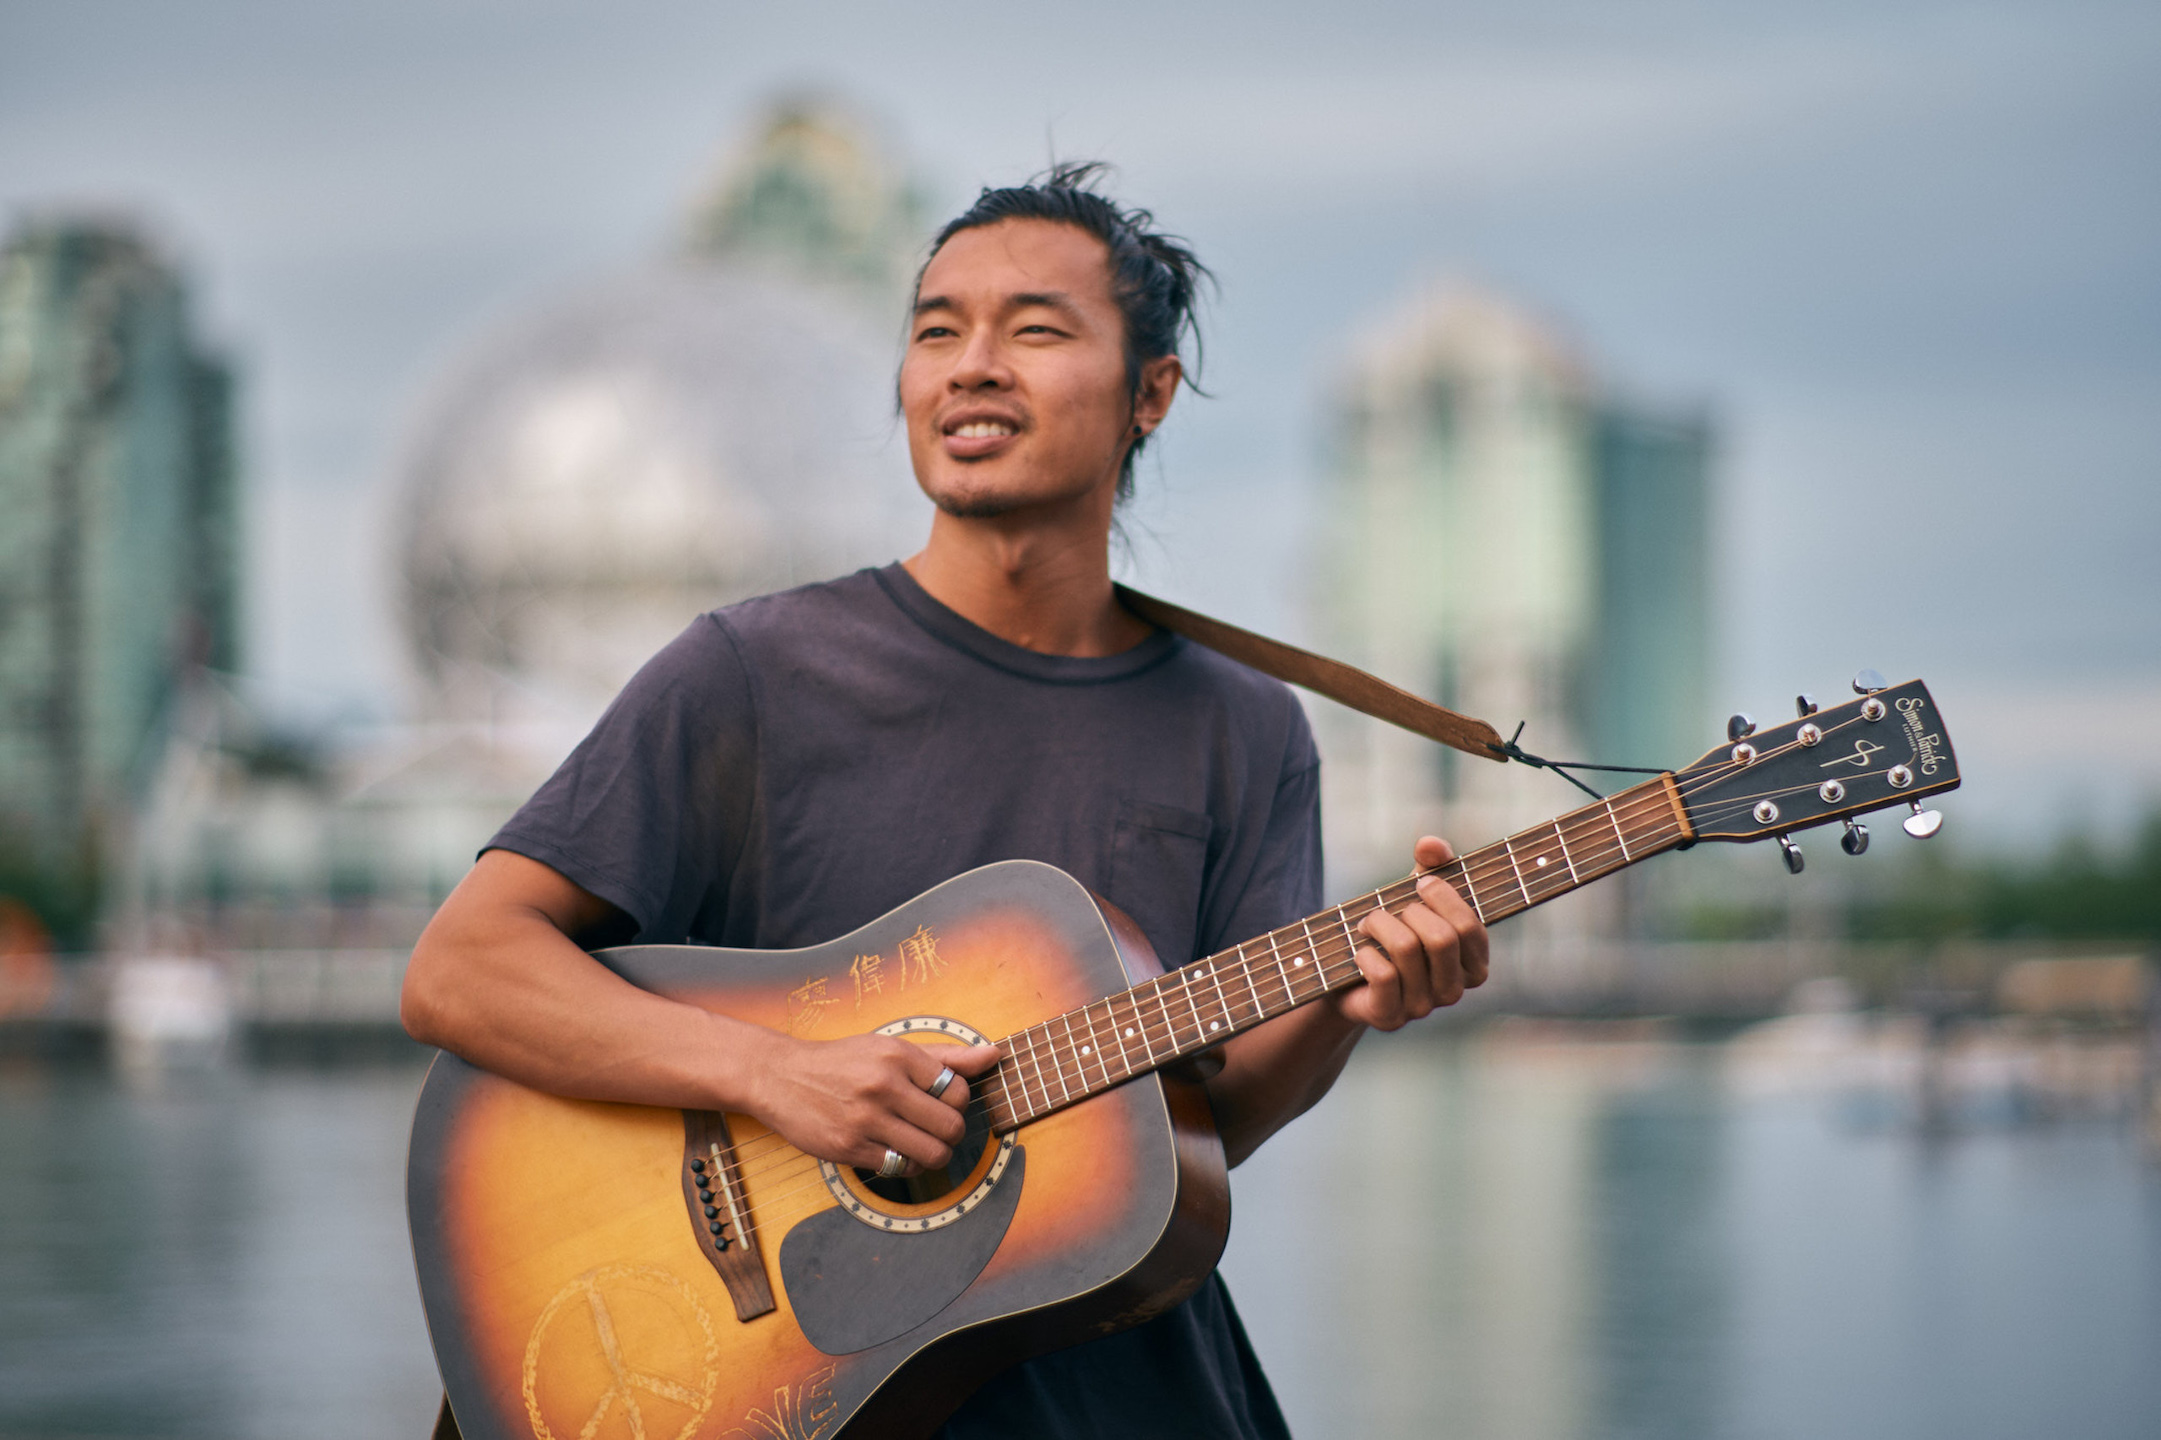 Portrait of Daniel Lew in an outdoor setting with a brown guitar.